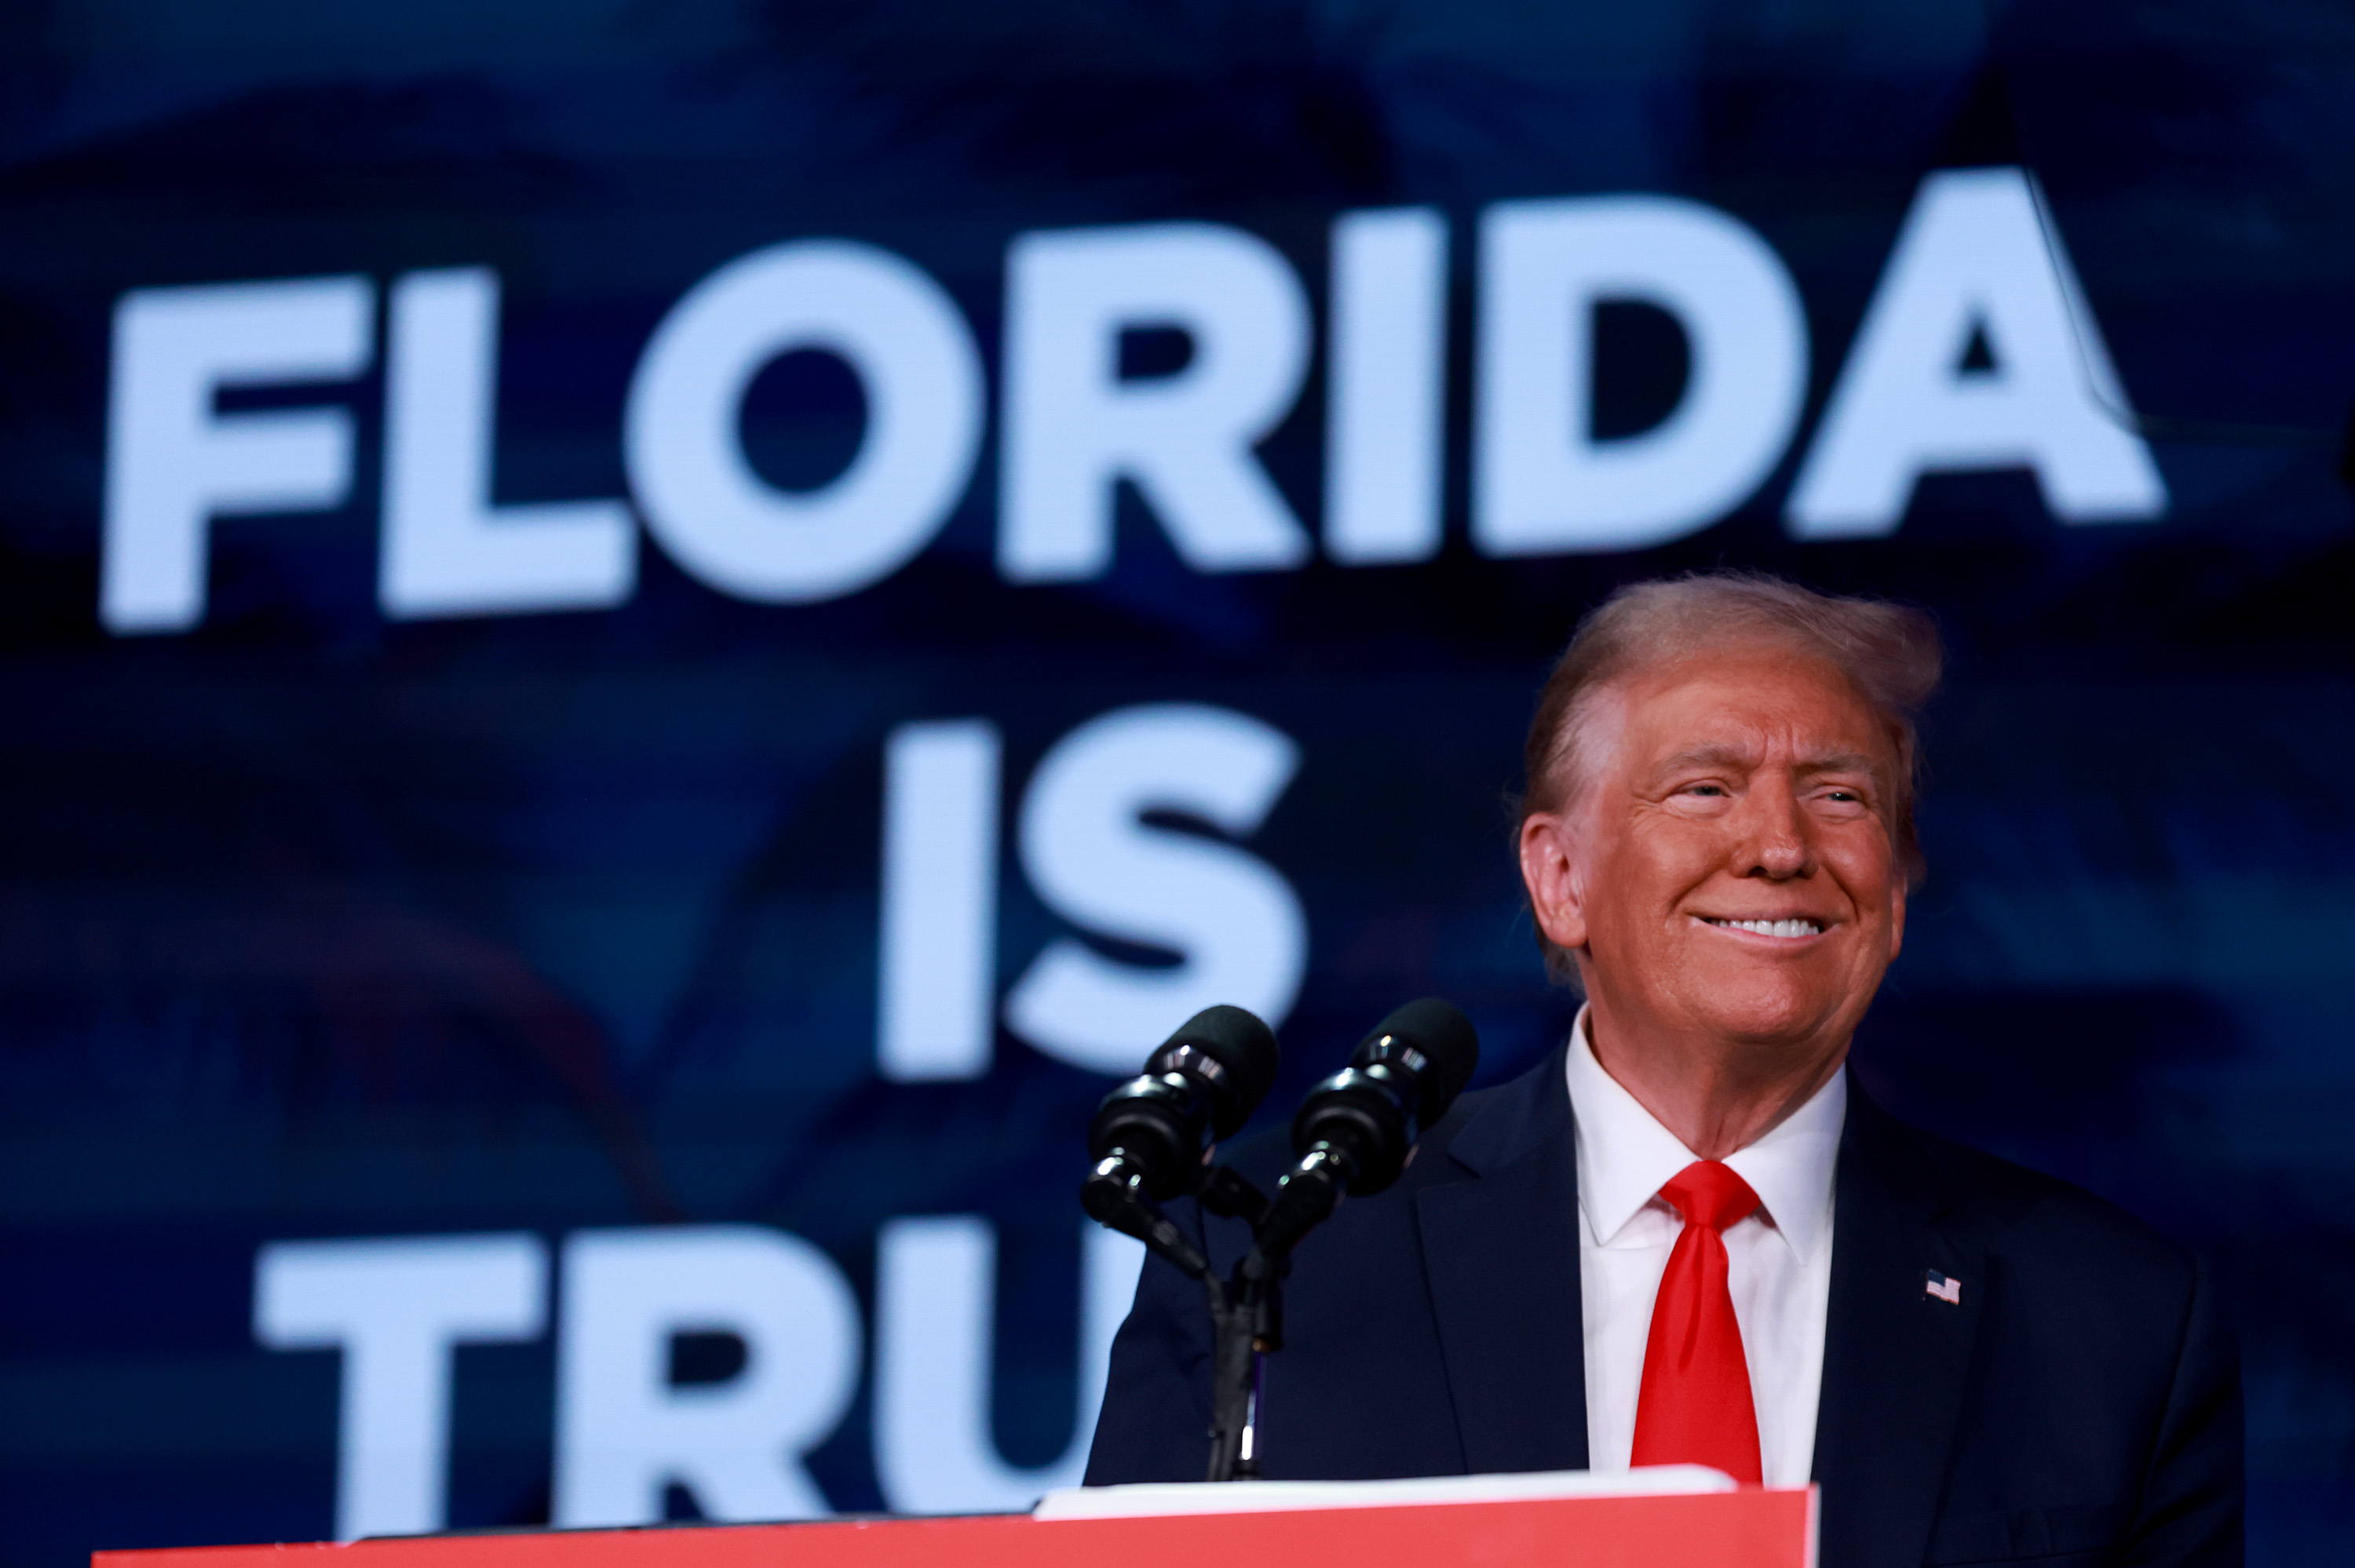 Trump’s complete speech at the Florida Freedom Summit.